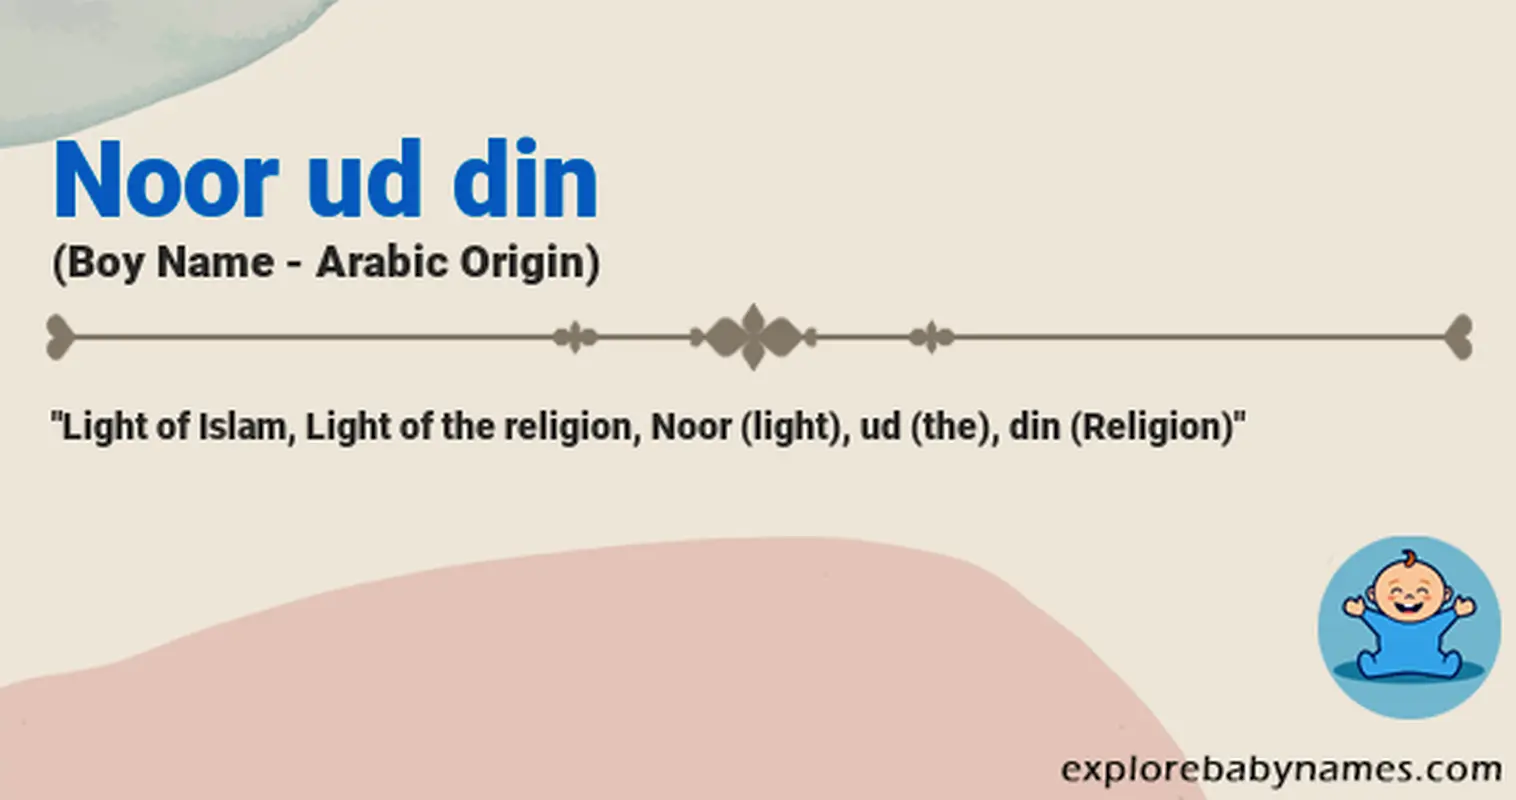 Meaning of Noor ud din